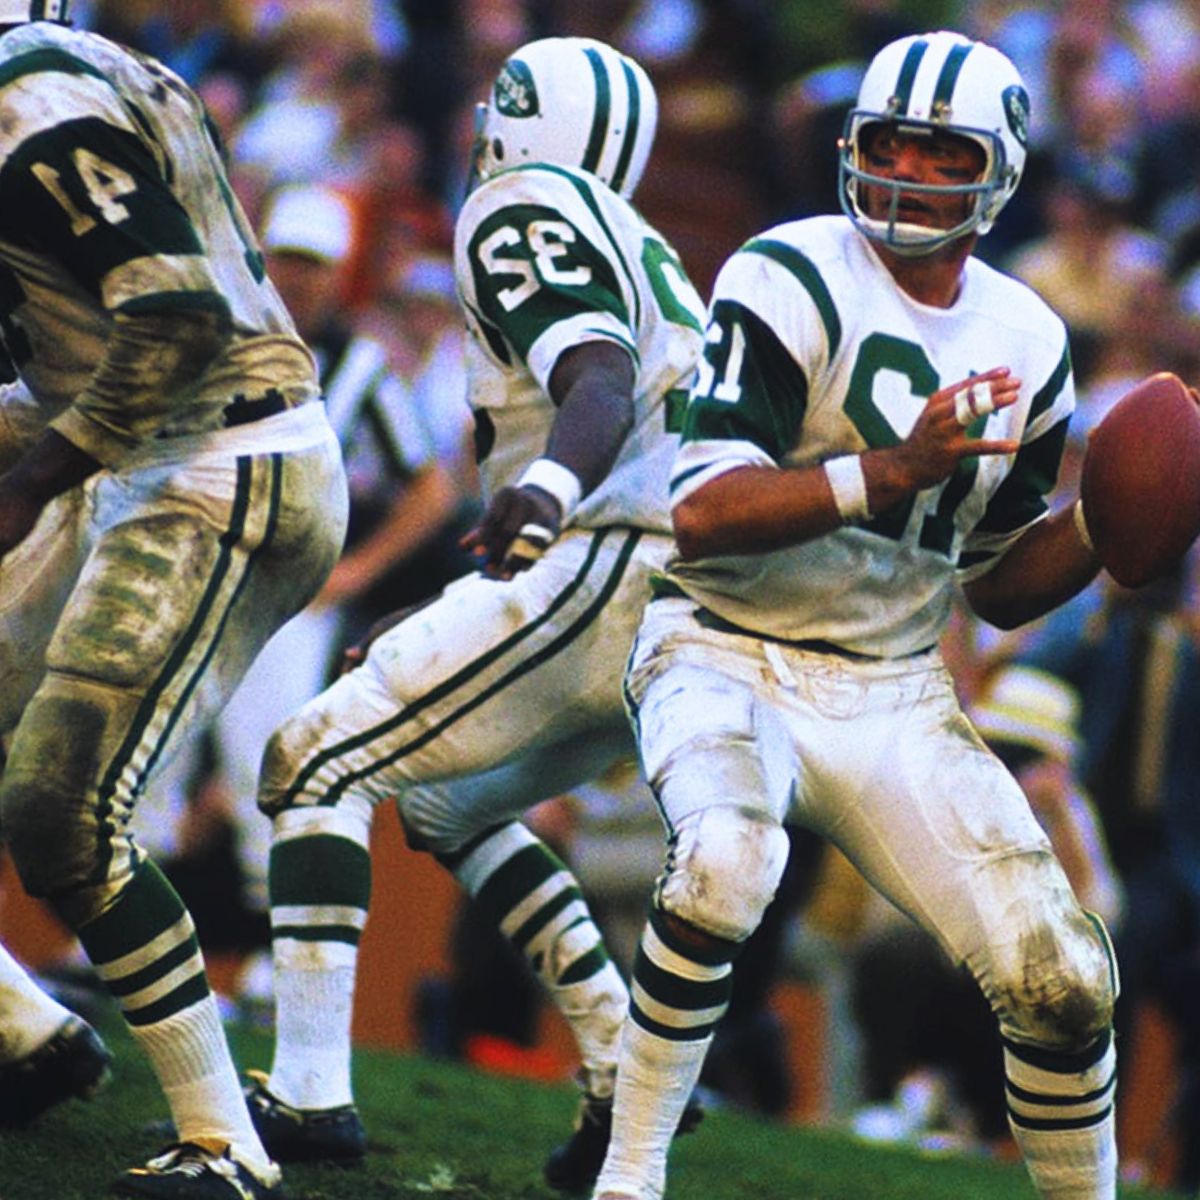 New York Jets vs. Baltimore Colts Super Bowl III in 1969